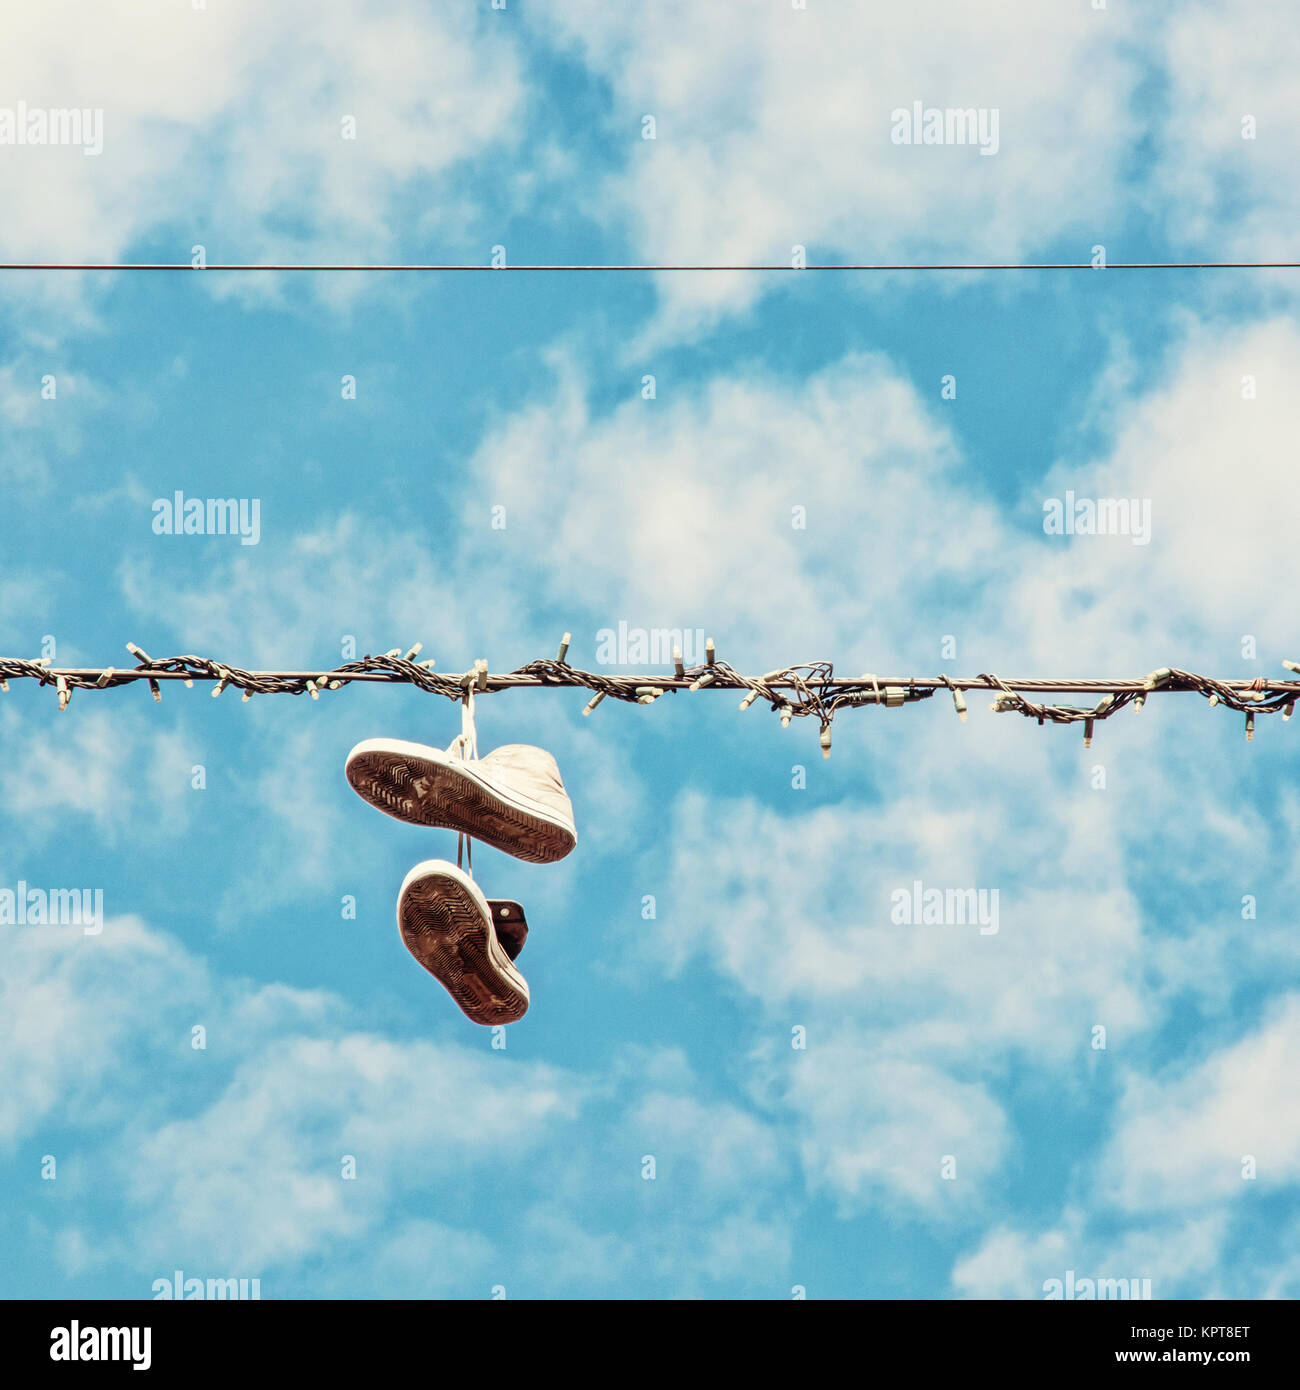 1,056 Sneakers Hanging On Wire Images, Stock Photos, 3D objects, & Vectors  | Shutterstock